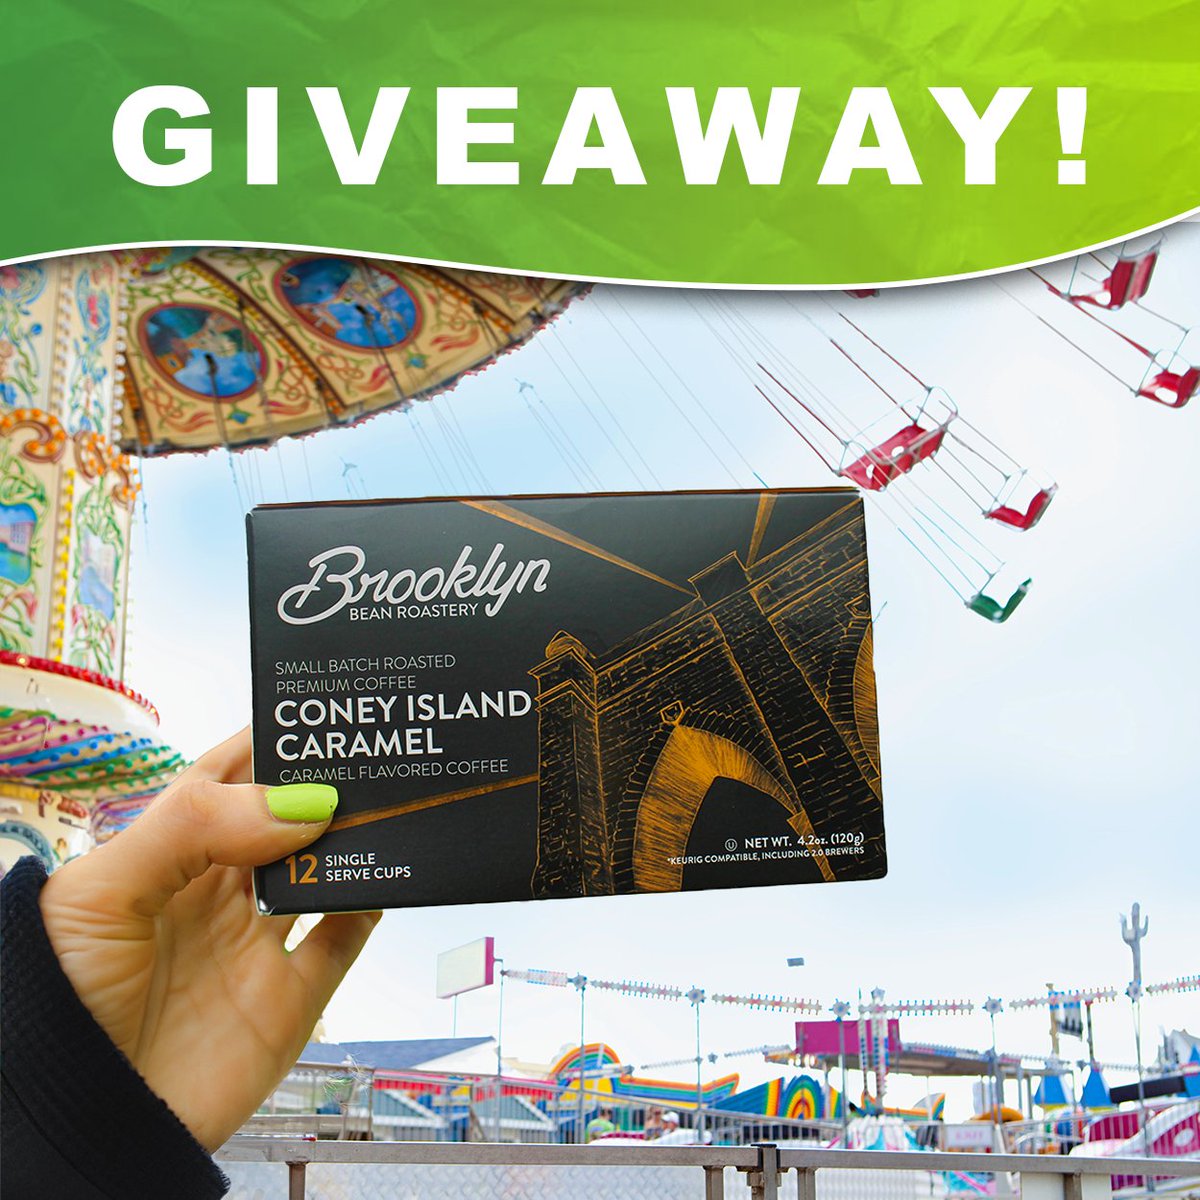 It’s Giveaway time! To enter, tag a friend you’d go to a carnival with 🎡🎢 Winner will be chosen on the 9th. Good luck! 🎊

#CoffeeBreak #NYCCoffee #NewYork #CoffeeLover #CoffeeGram #Cafe #ConeyIslandCaramel #Carnival #Giveaway